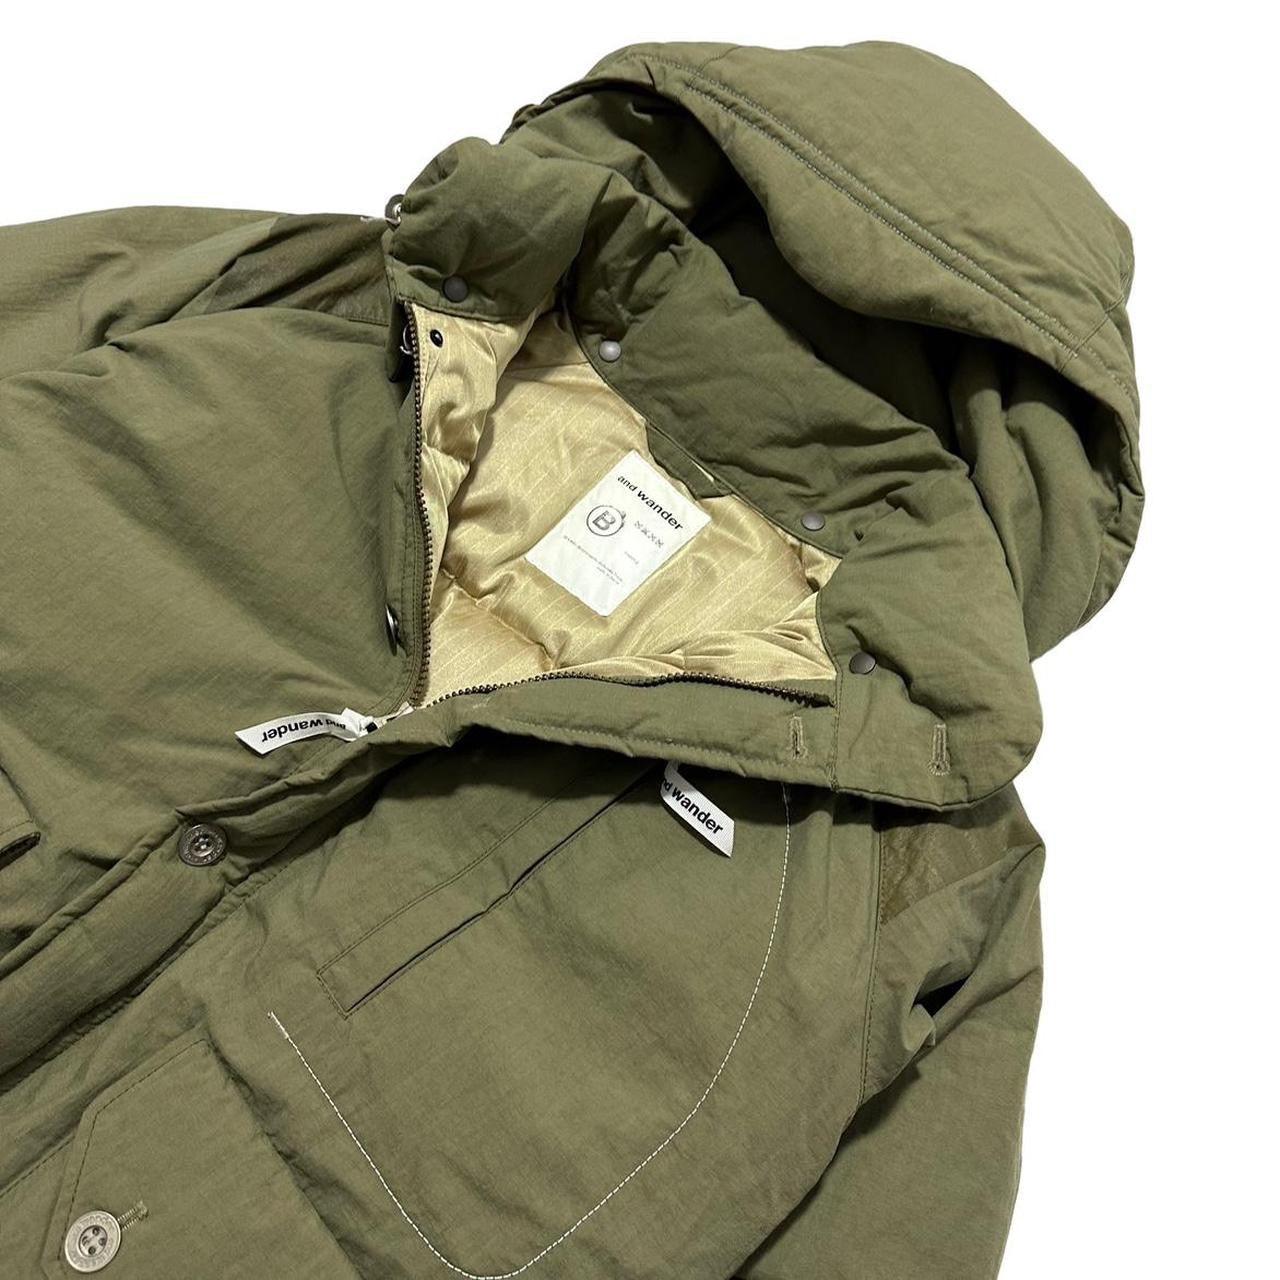 And Wander Sample Pertex Unlimited Padded Down Jacket - Known Source